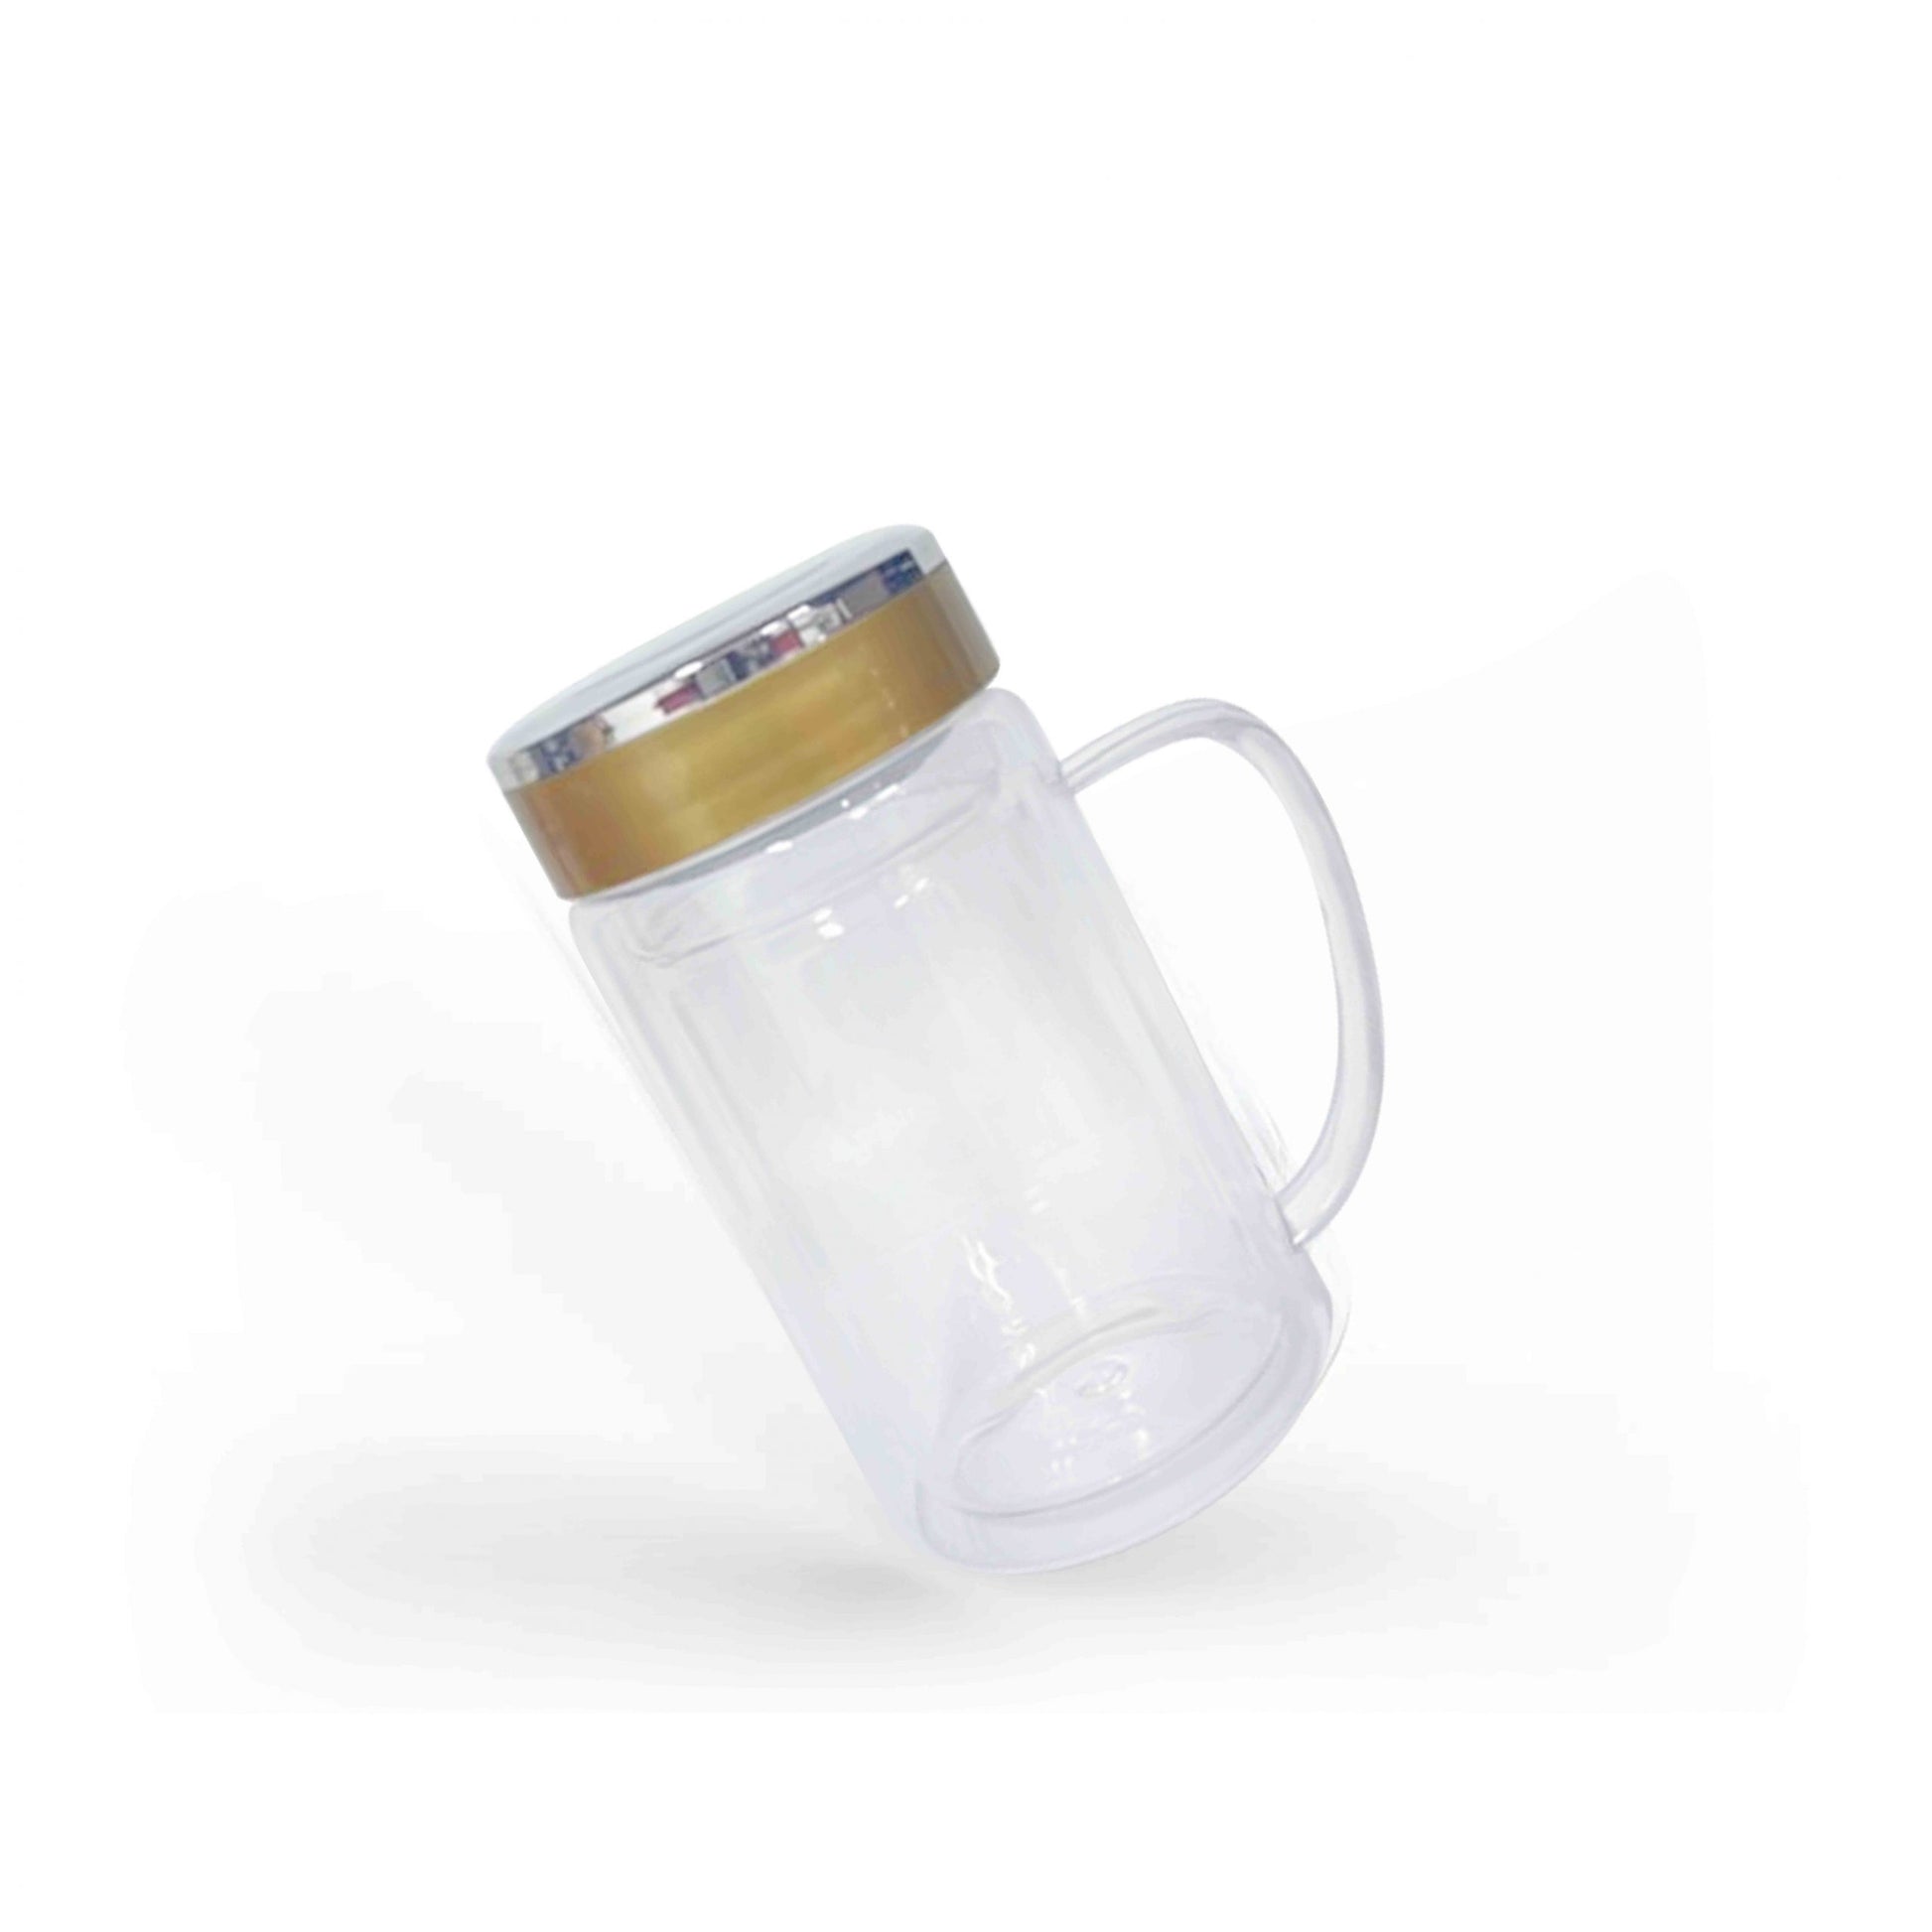 A tilted double wall glass mug for corporate gifting